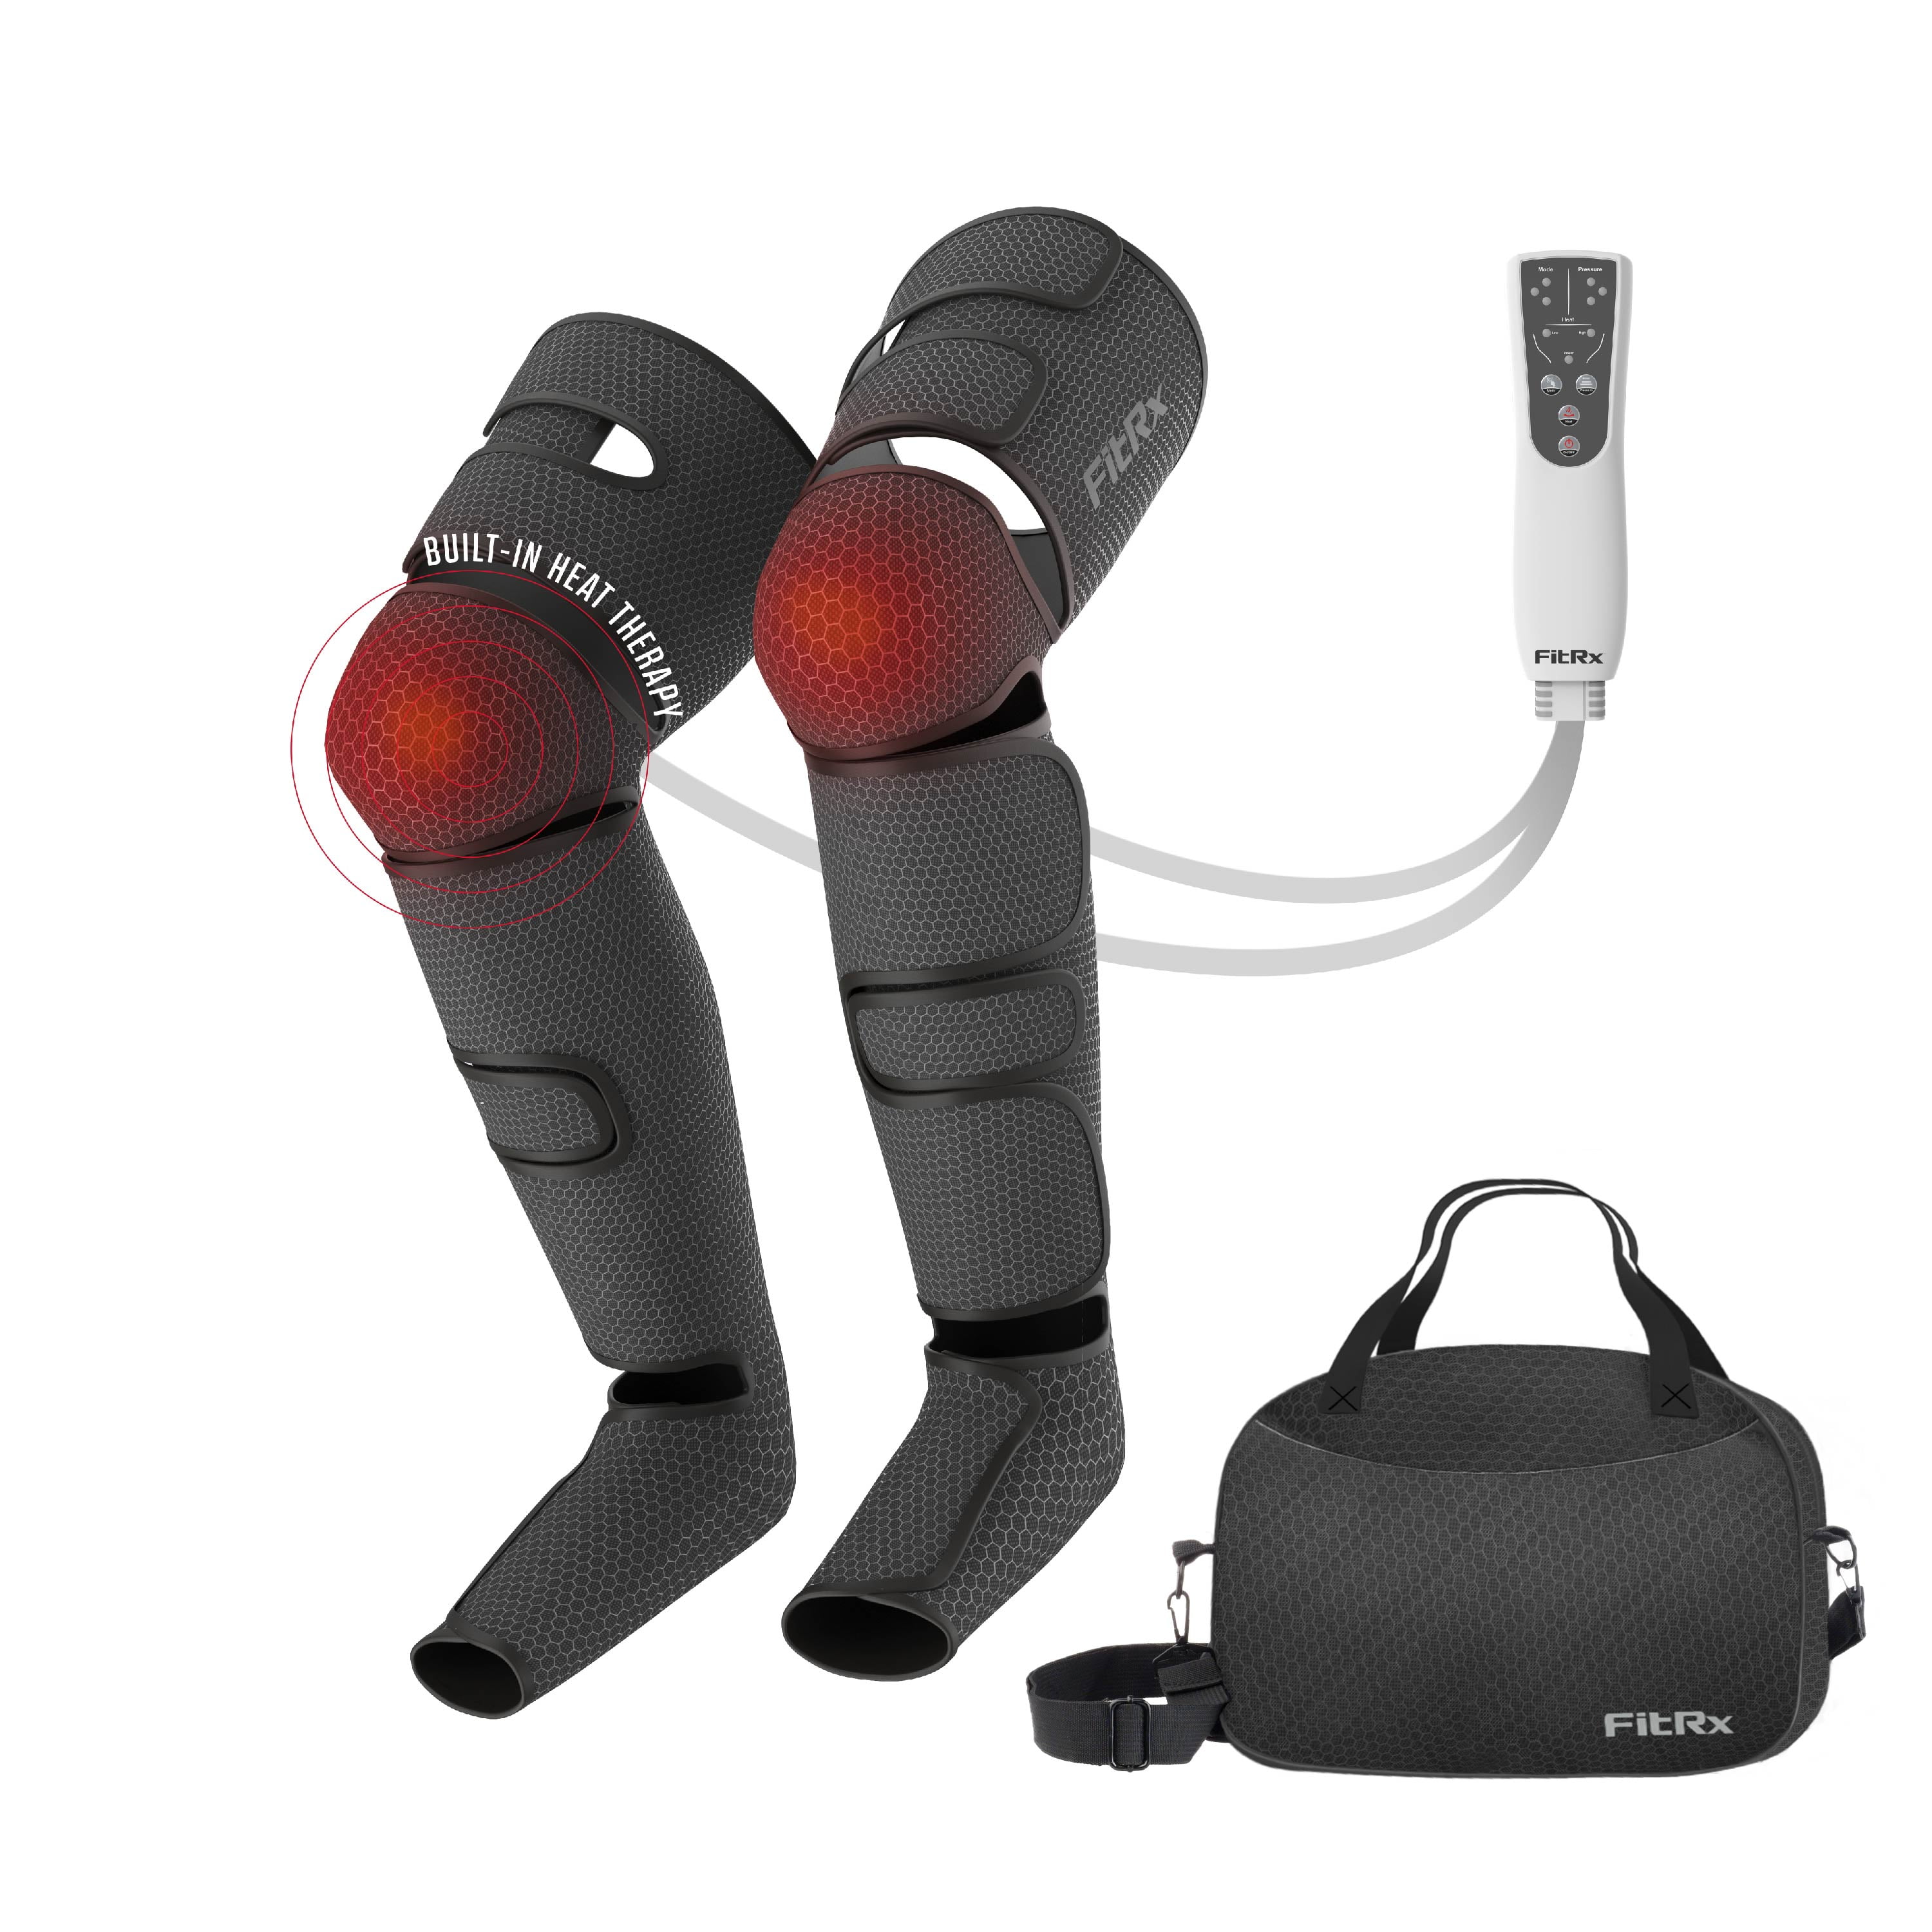 FitRx RecoverMax Leg Massager, Heated Compression Leg and Foot Massager  with Multiple Massage, Intensity, and Heat Levels